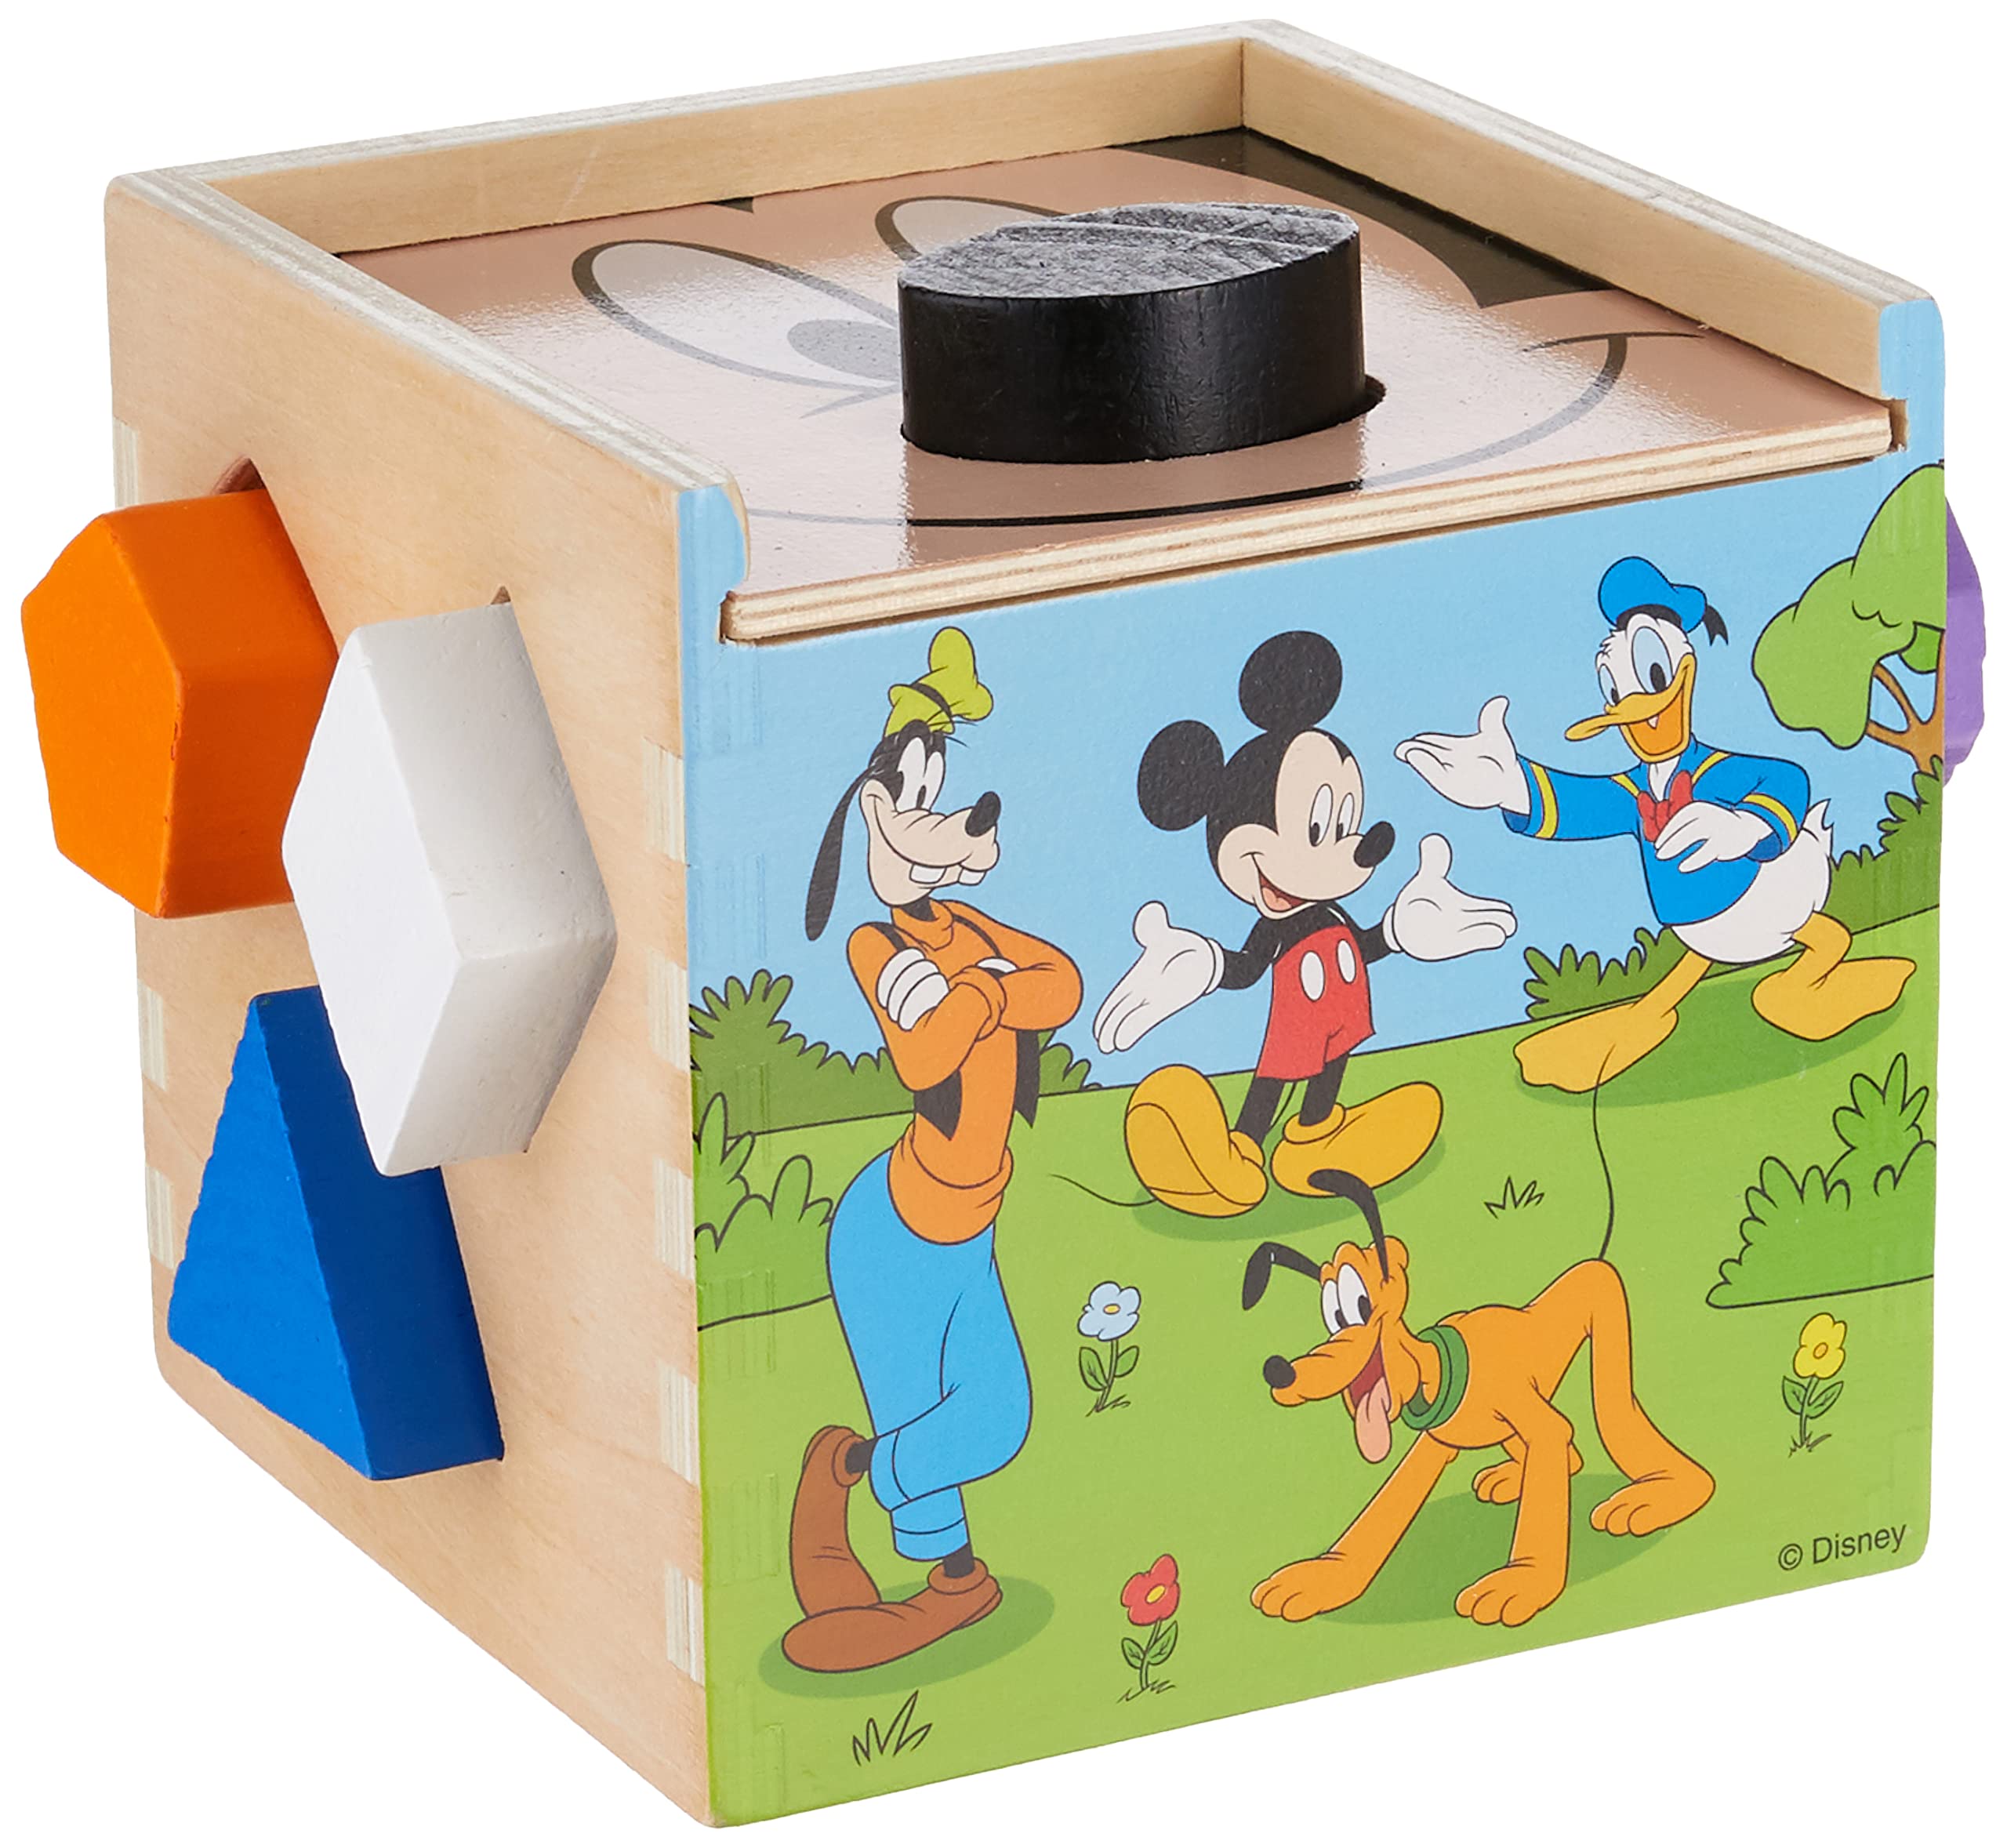 Melissa & Doug Disney Mickey Mouse & Friends Wooden Shape Sorting Cube - Mickey Mouse Toys, Classic Wooden Toys For Babies And Toddlers Ages 2+